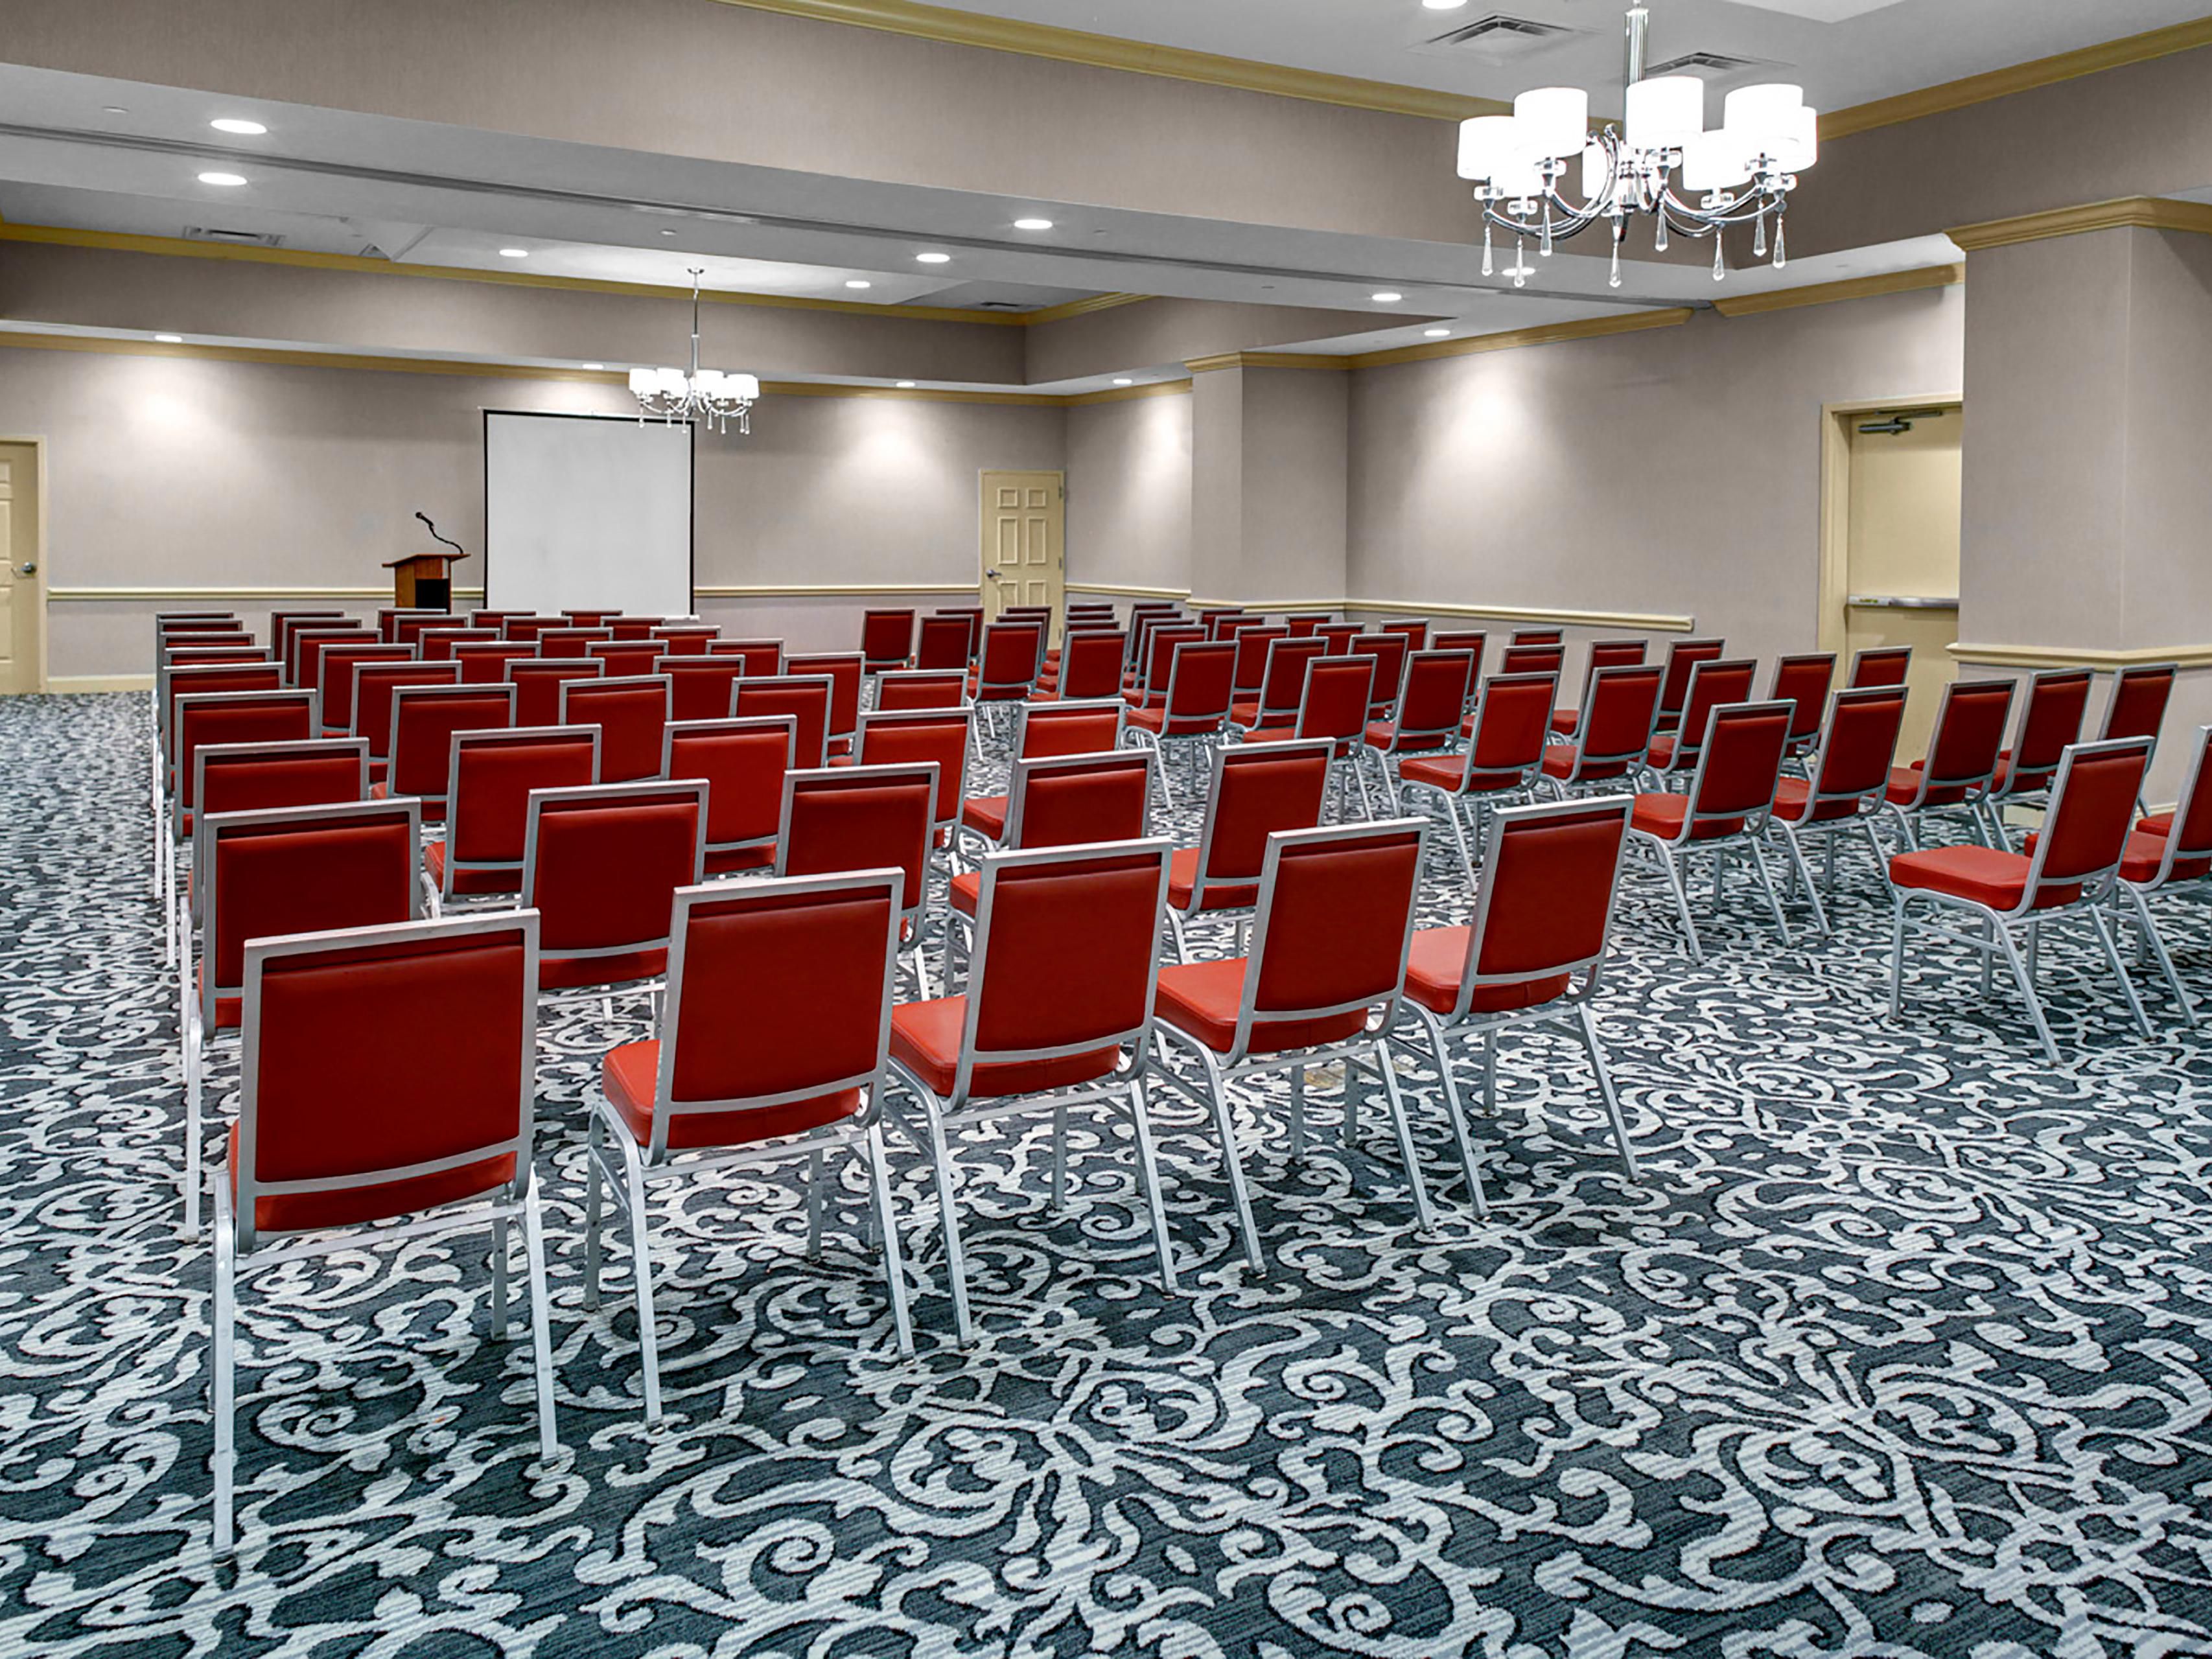 Whether you’re a first-timer or an experienced organizer, we make planning and booking your next meeting room easier than ever. Our staff will help you plan each moment, so you can focus on using the meeting space for your best meeting yet.